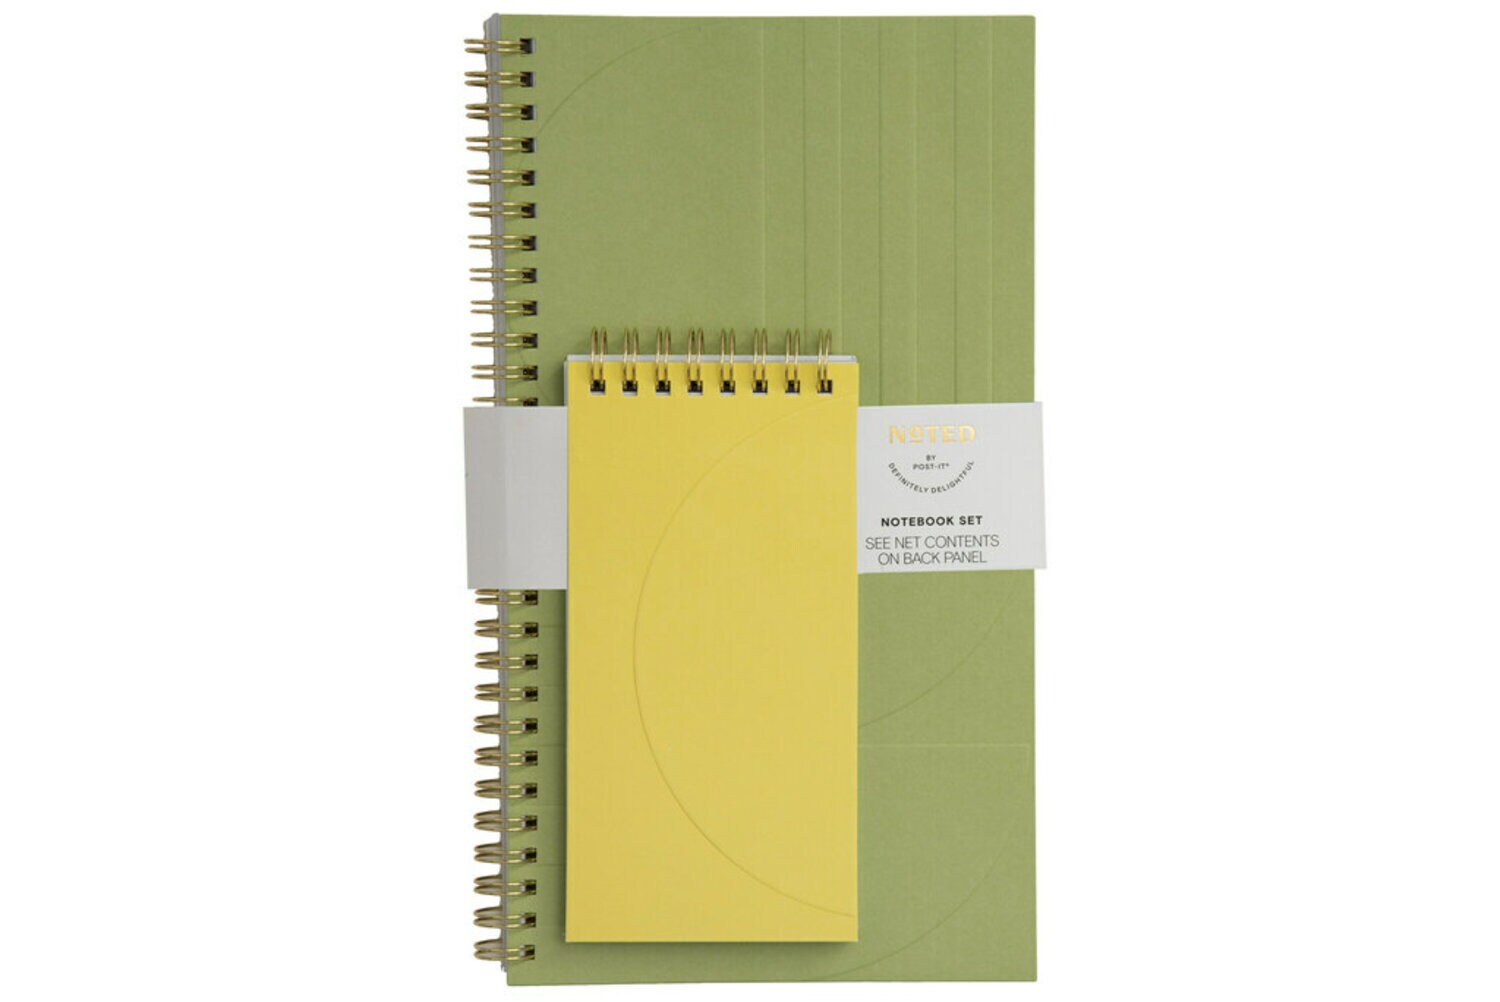 7100283611 - Post-it Notebook Set NTD6-NBSET-3, 3 in x 6 in (76 mm x 152 mm) 150 pages and 5.5 in x 10 in (139.7 mm x 254 mm) 150 pages